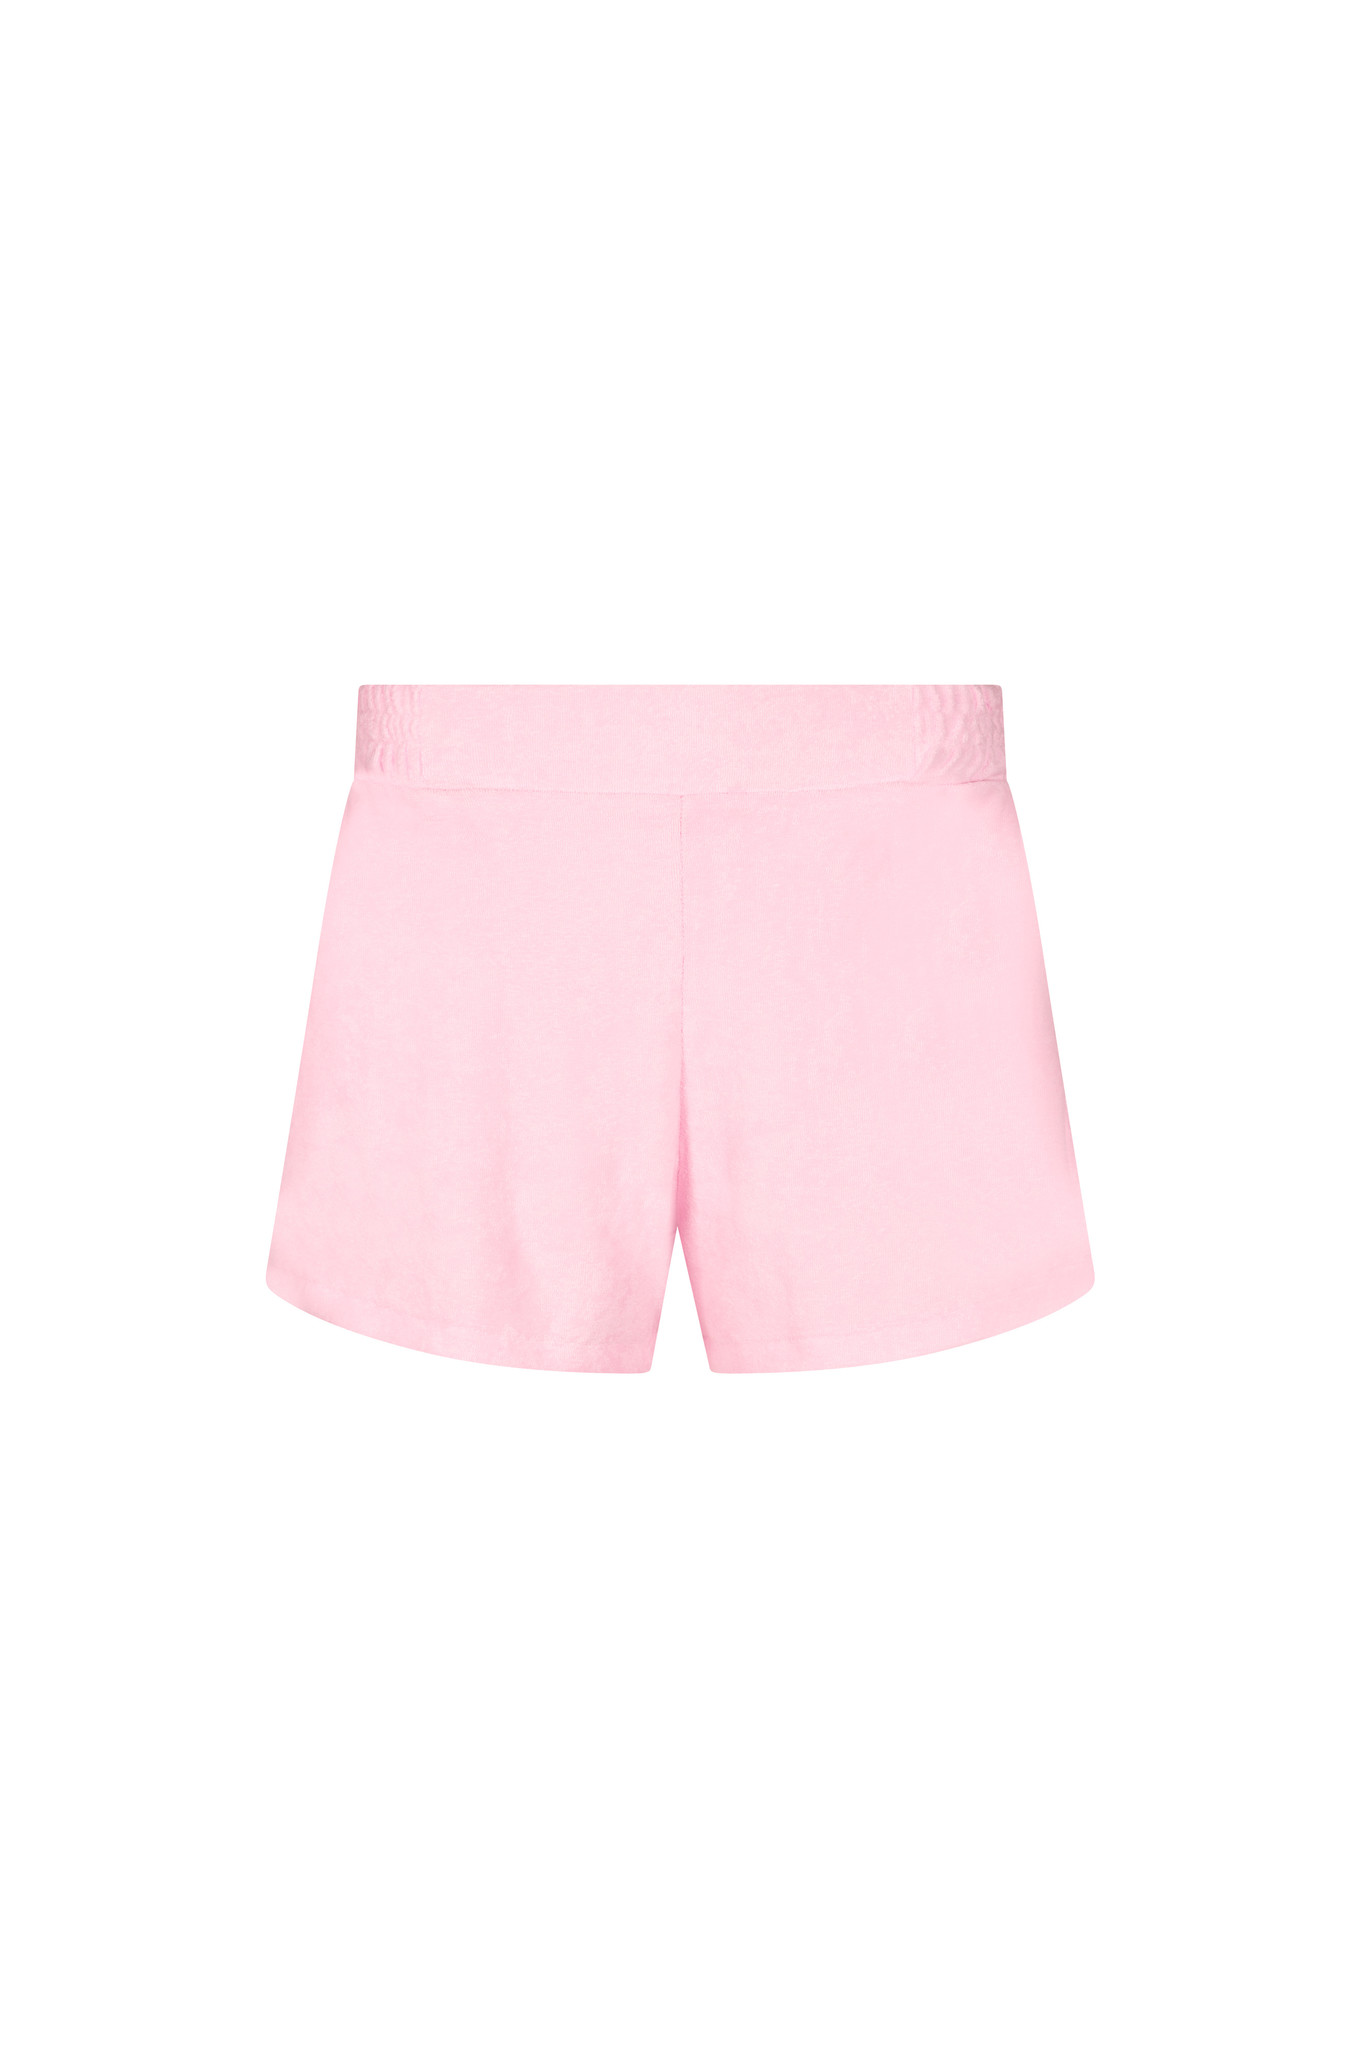 WILLY SHORTS IN PINK-1